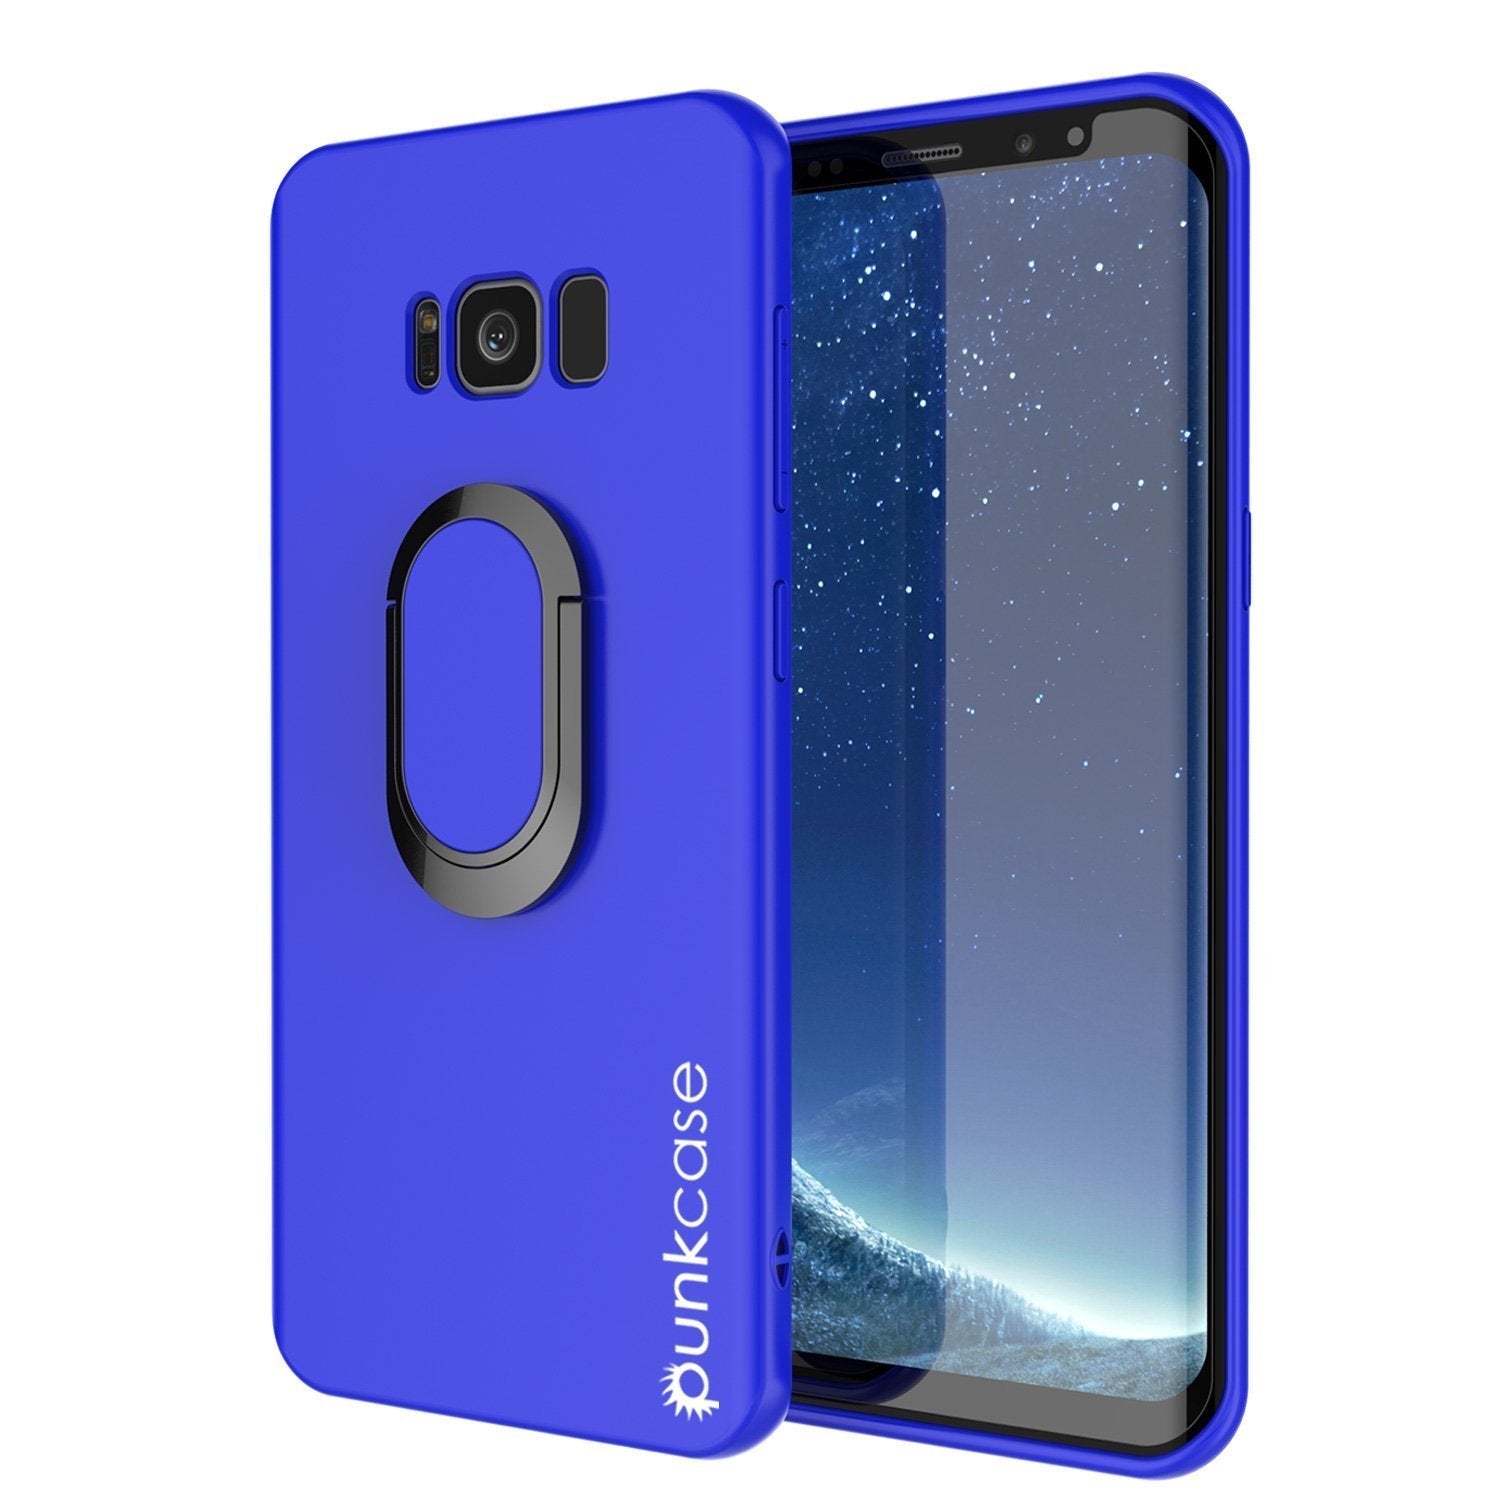 Galaxy S8 Case, Punkcase Magnetix Protective TPU Cover W/ Kickstand, Screen Protector [Blue] (Color in image: blue)